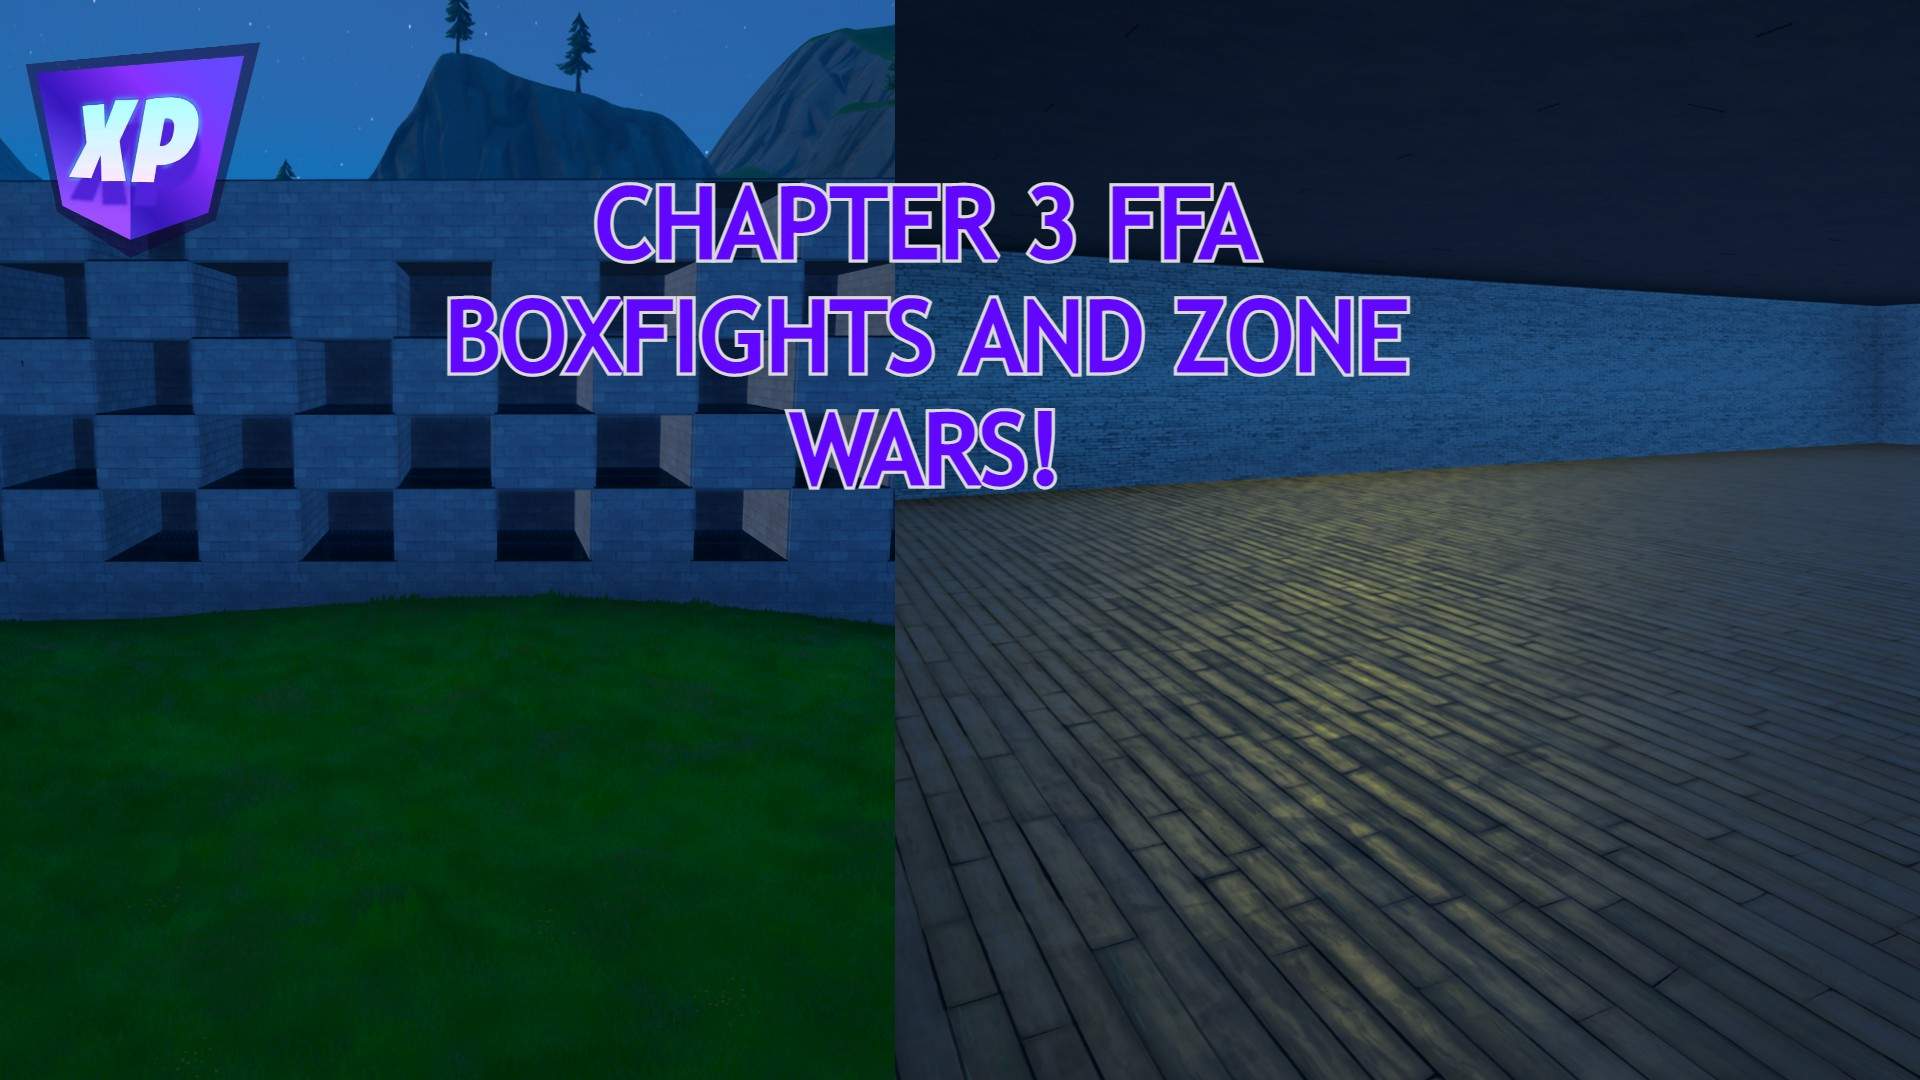 CHAPTER 3 BOXFIGHTS AND ZONE WARS! XP!